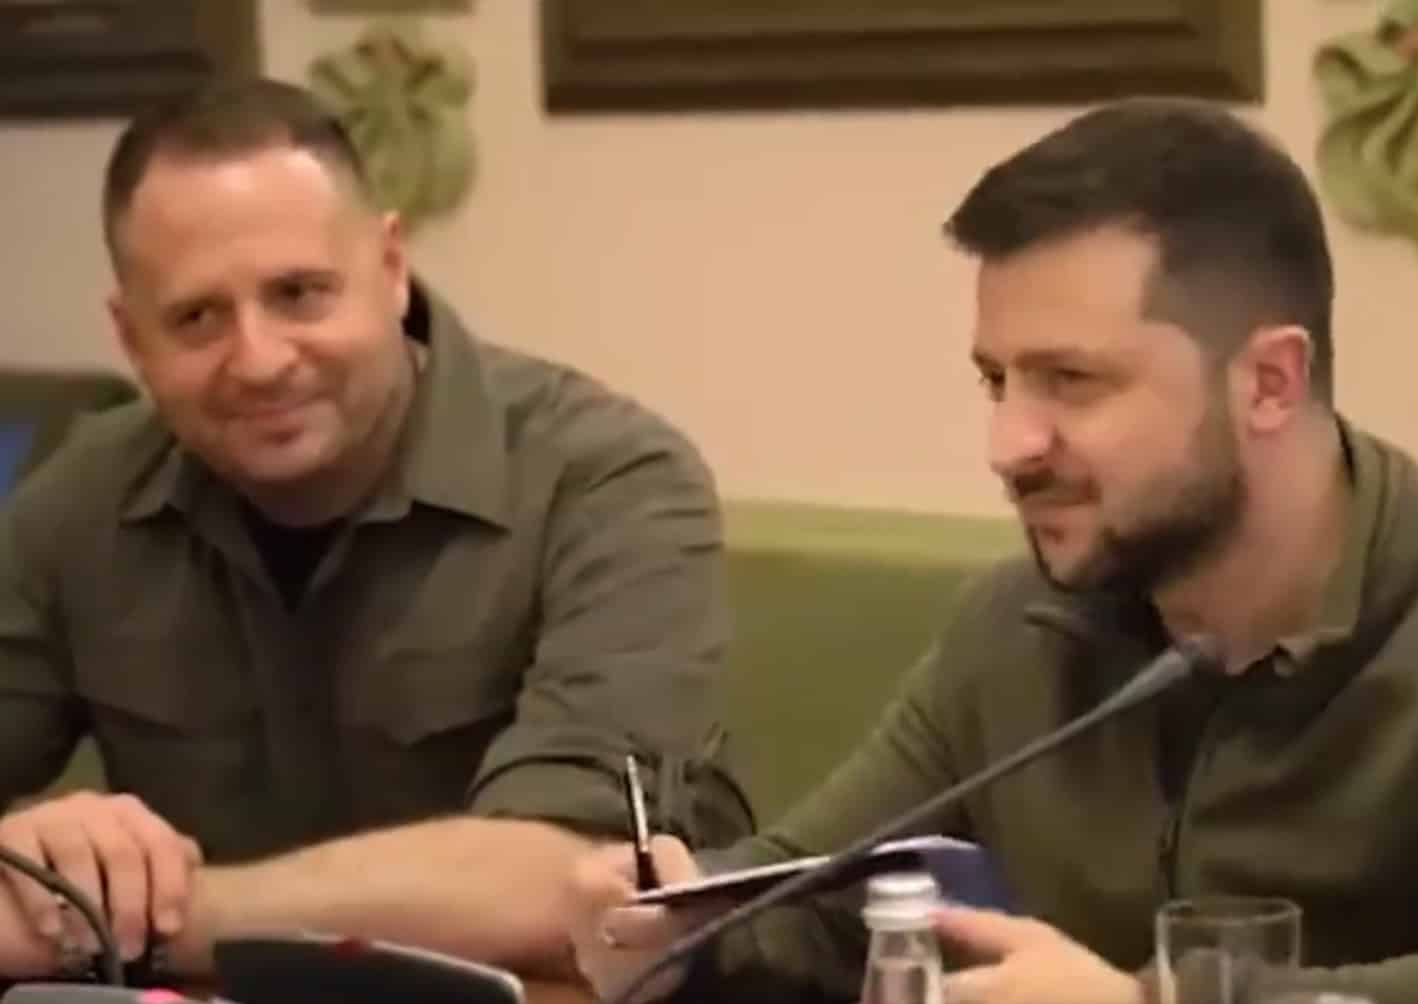 Watch: Zelensky’s face is a picture as he sits down with Johnson